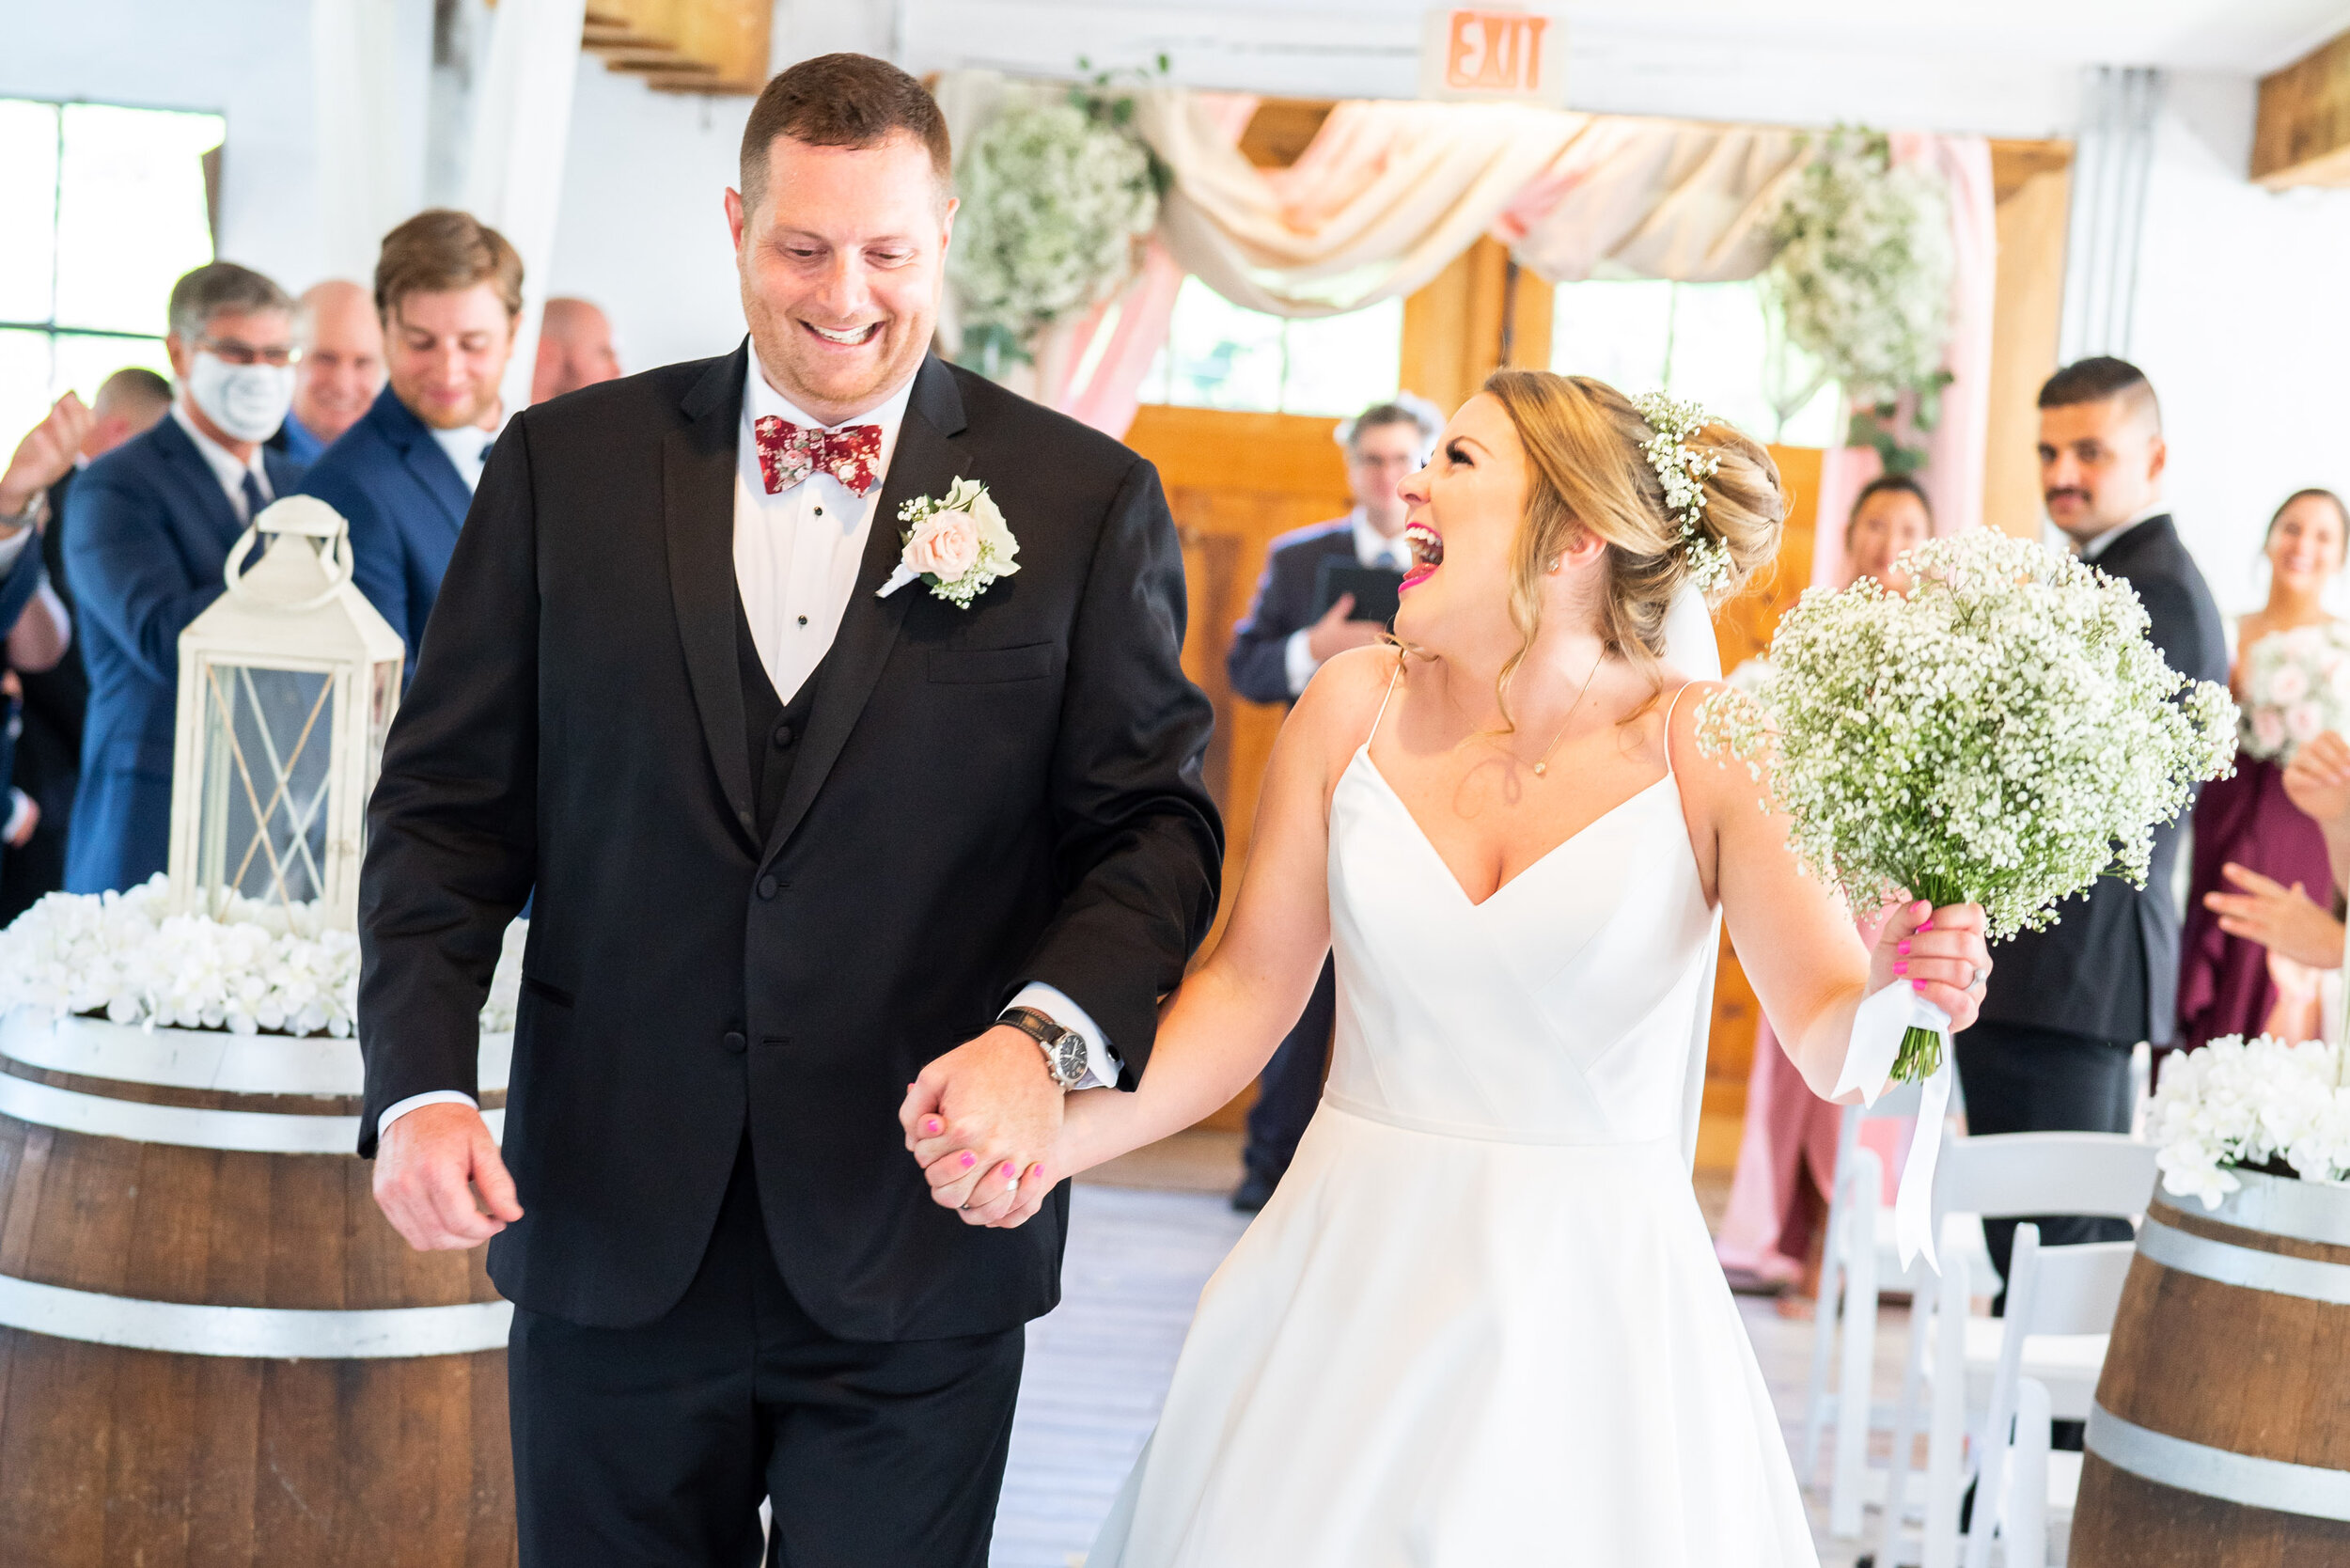 Bride and groom walking back down the aisle with baby's breath bouquet